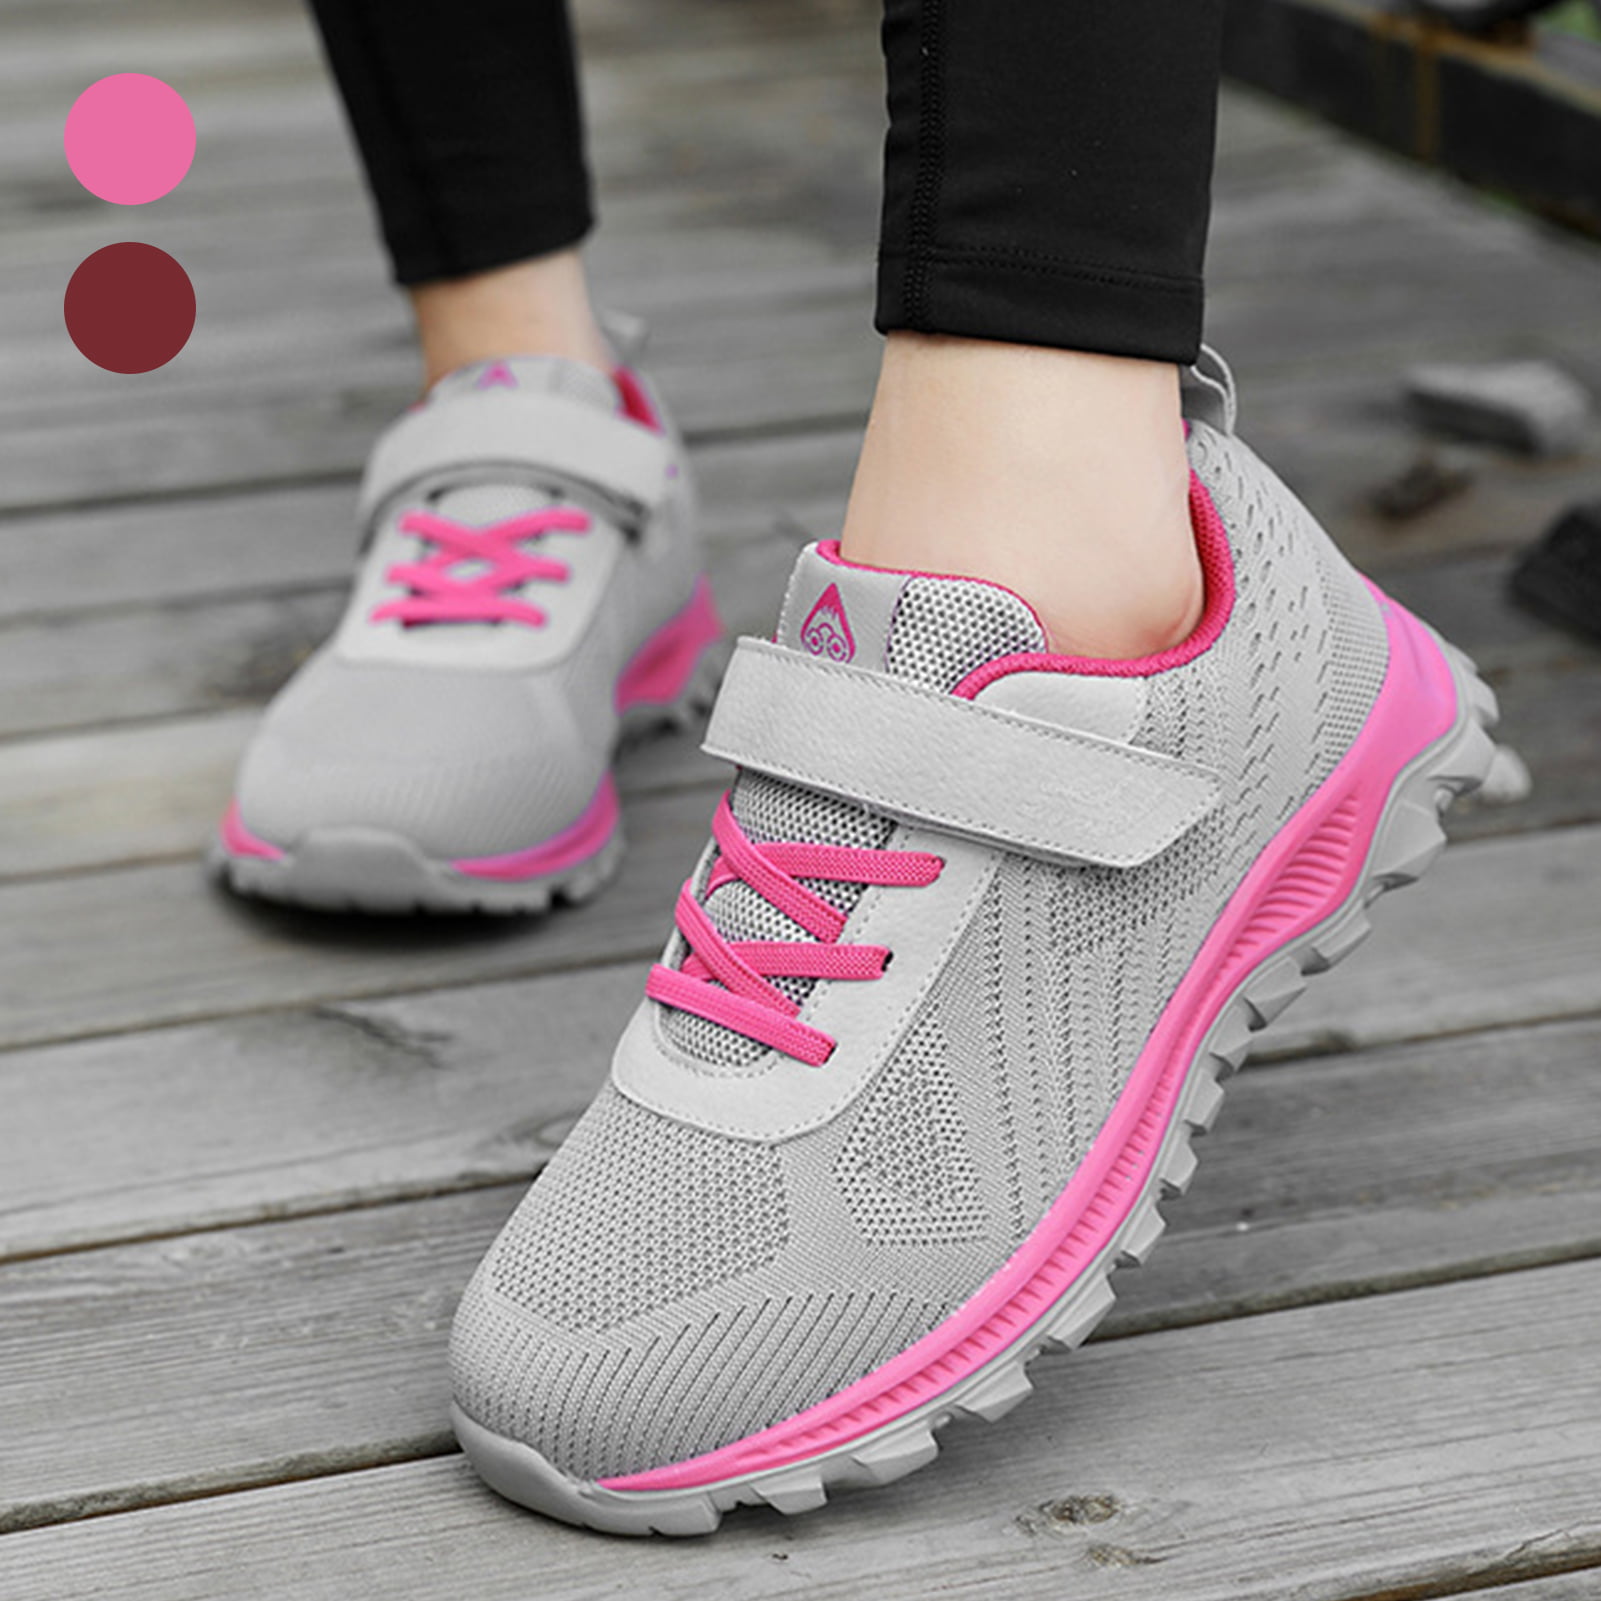 Women’s Fashion Sneakers Lace Up Comfort Breathable Running Sport Soft Shoes 